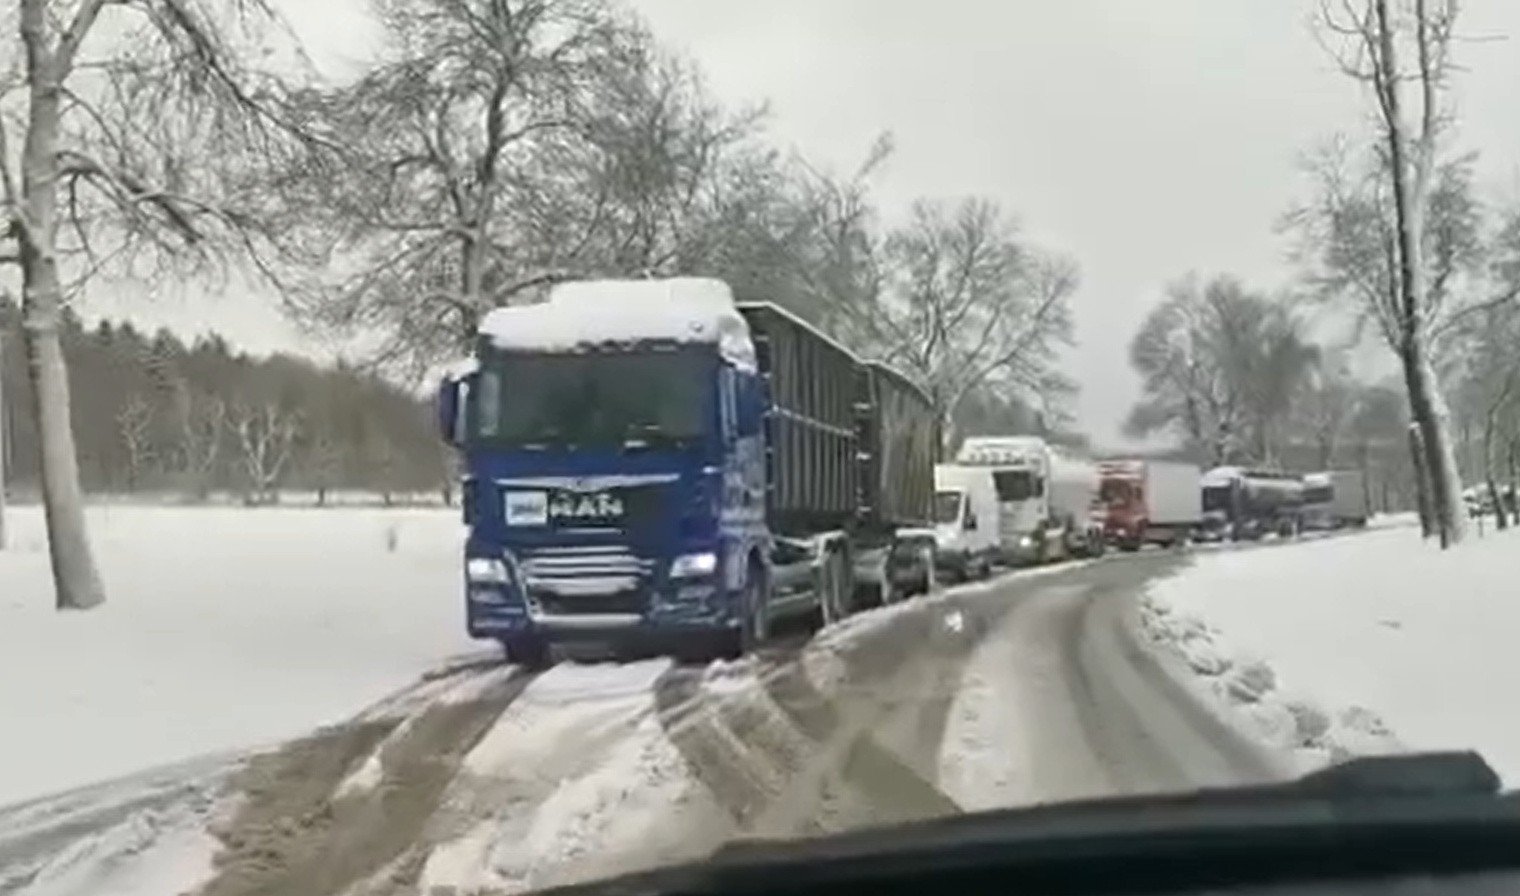 Appalling conditions on the roads of Lower Silesia.  Accidents, traffic jams and trucks that can’t go up the hill.  This is not the end of the problems